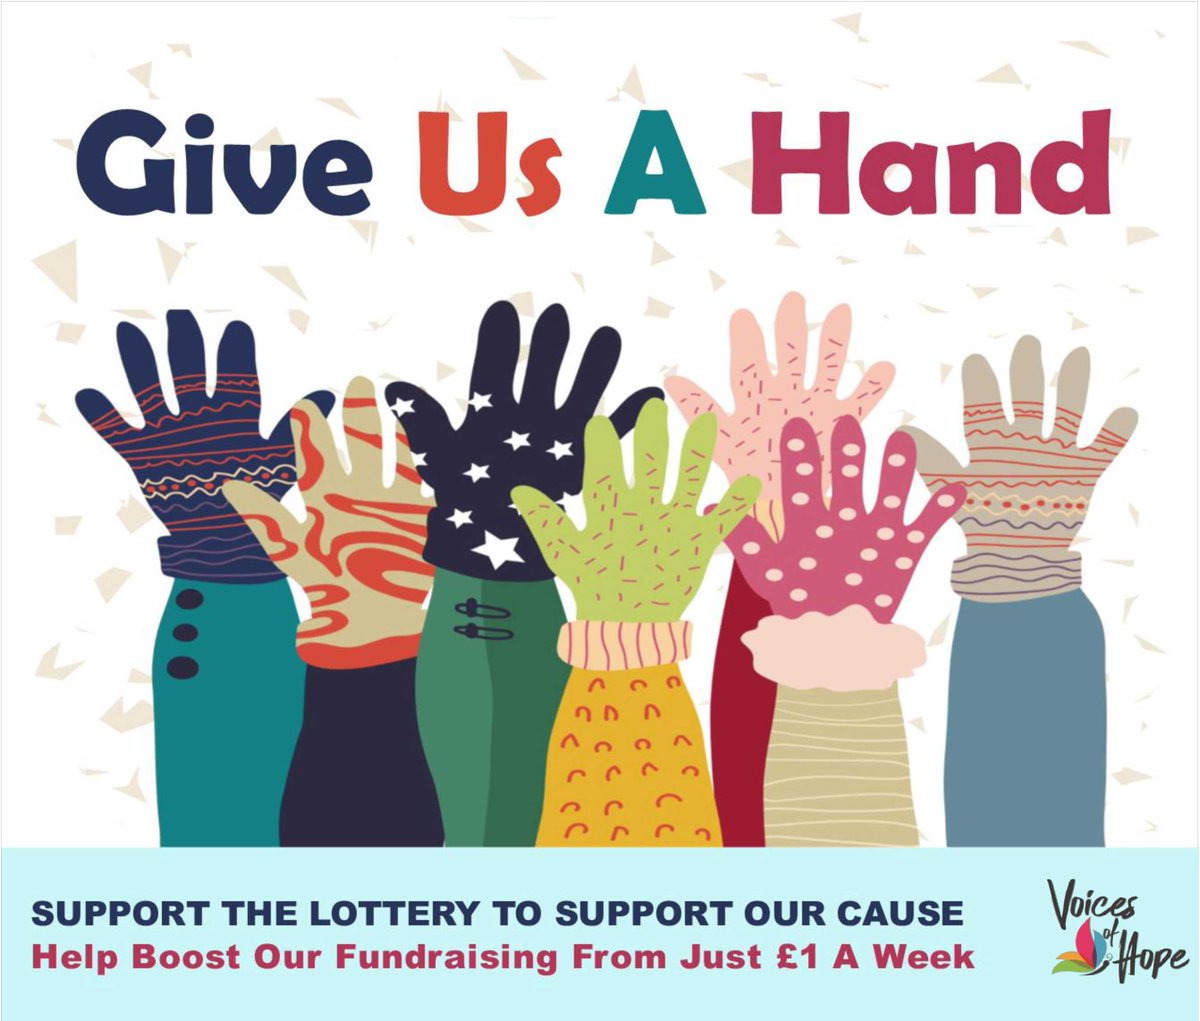 Now is the perfect time to support us and potentially win yourself a prize in the process!... Visit kingstonlottery.co.uk/support/voices… to be in with a chance!
#kingstoncommunitylottery #prizes #VoicesofHope